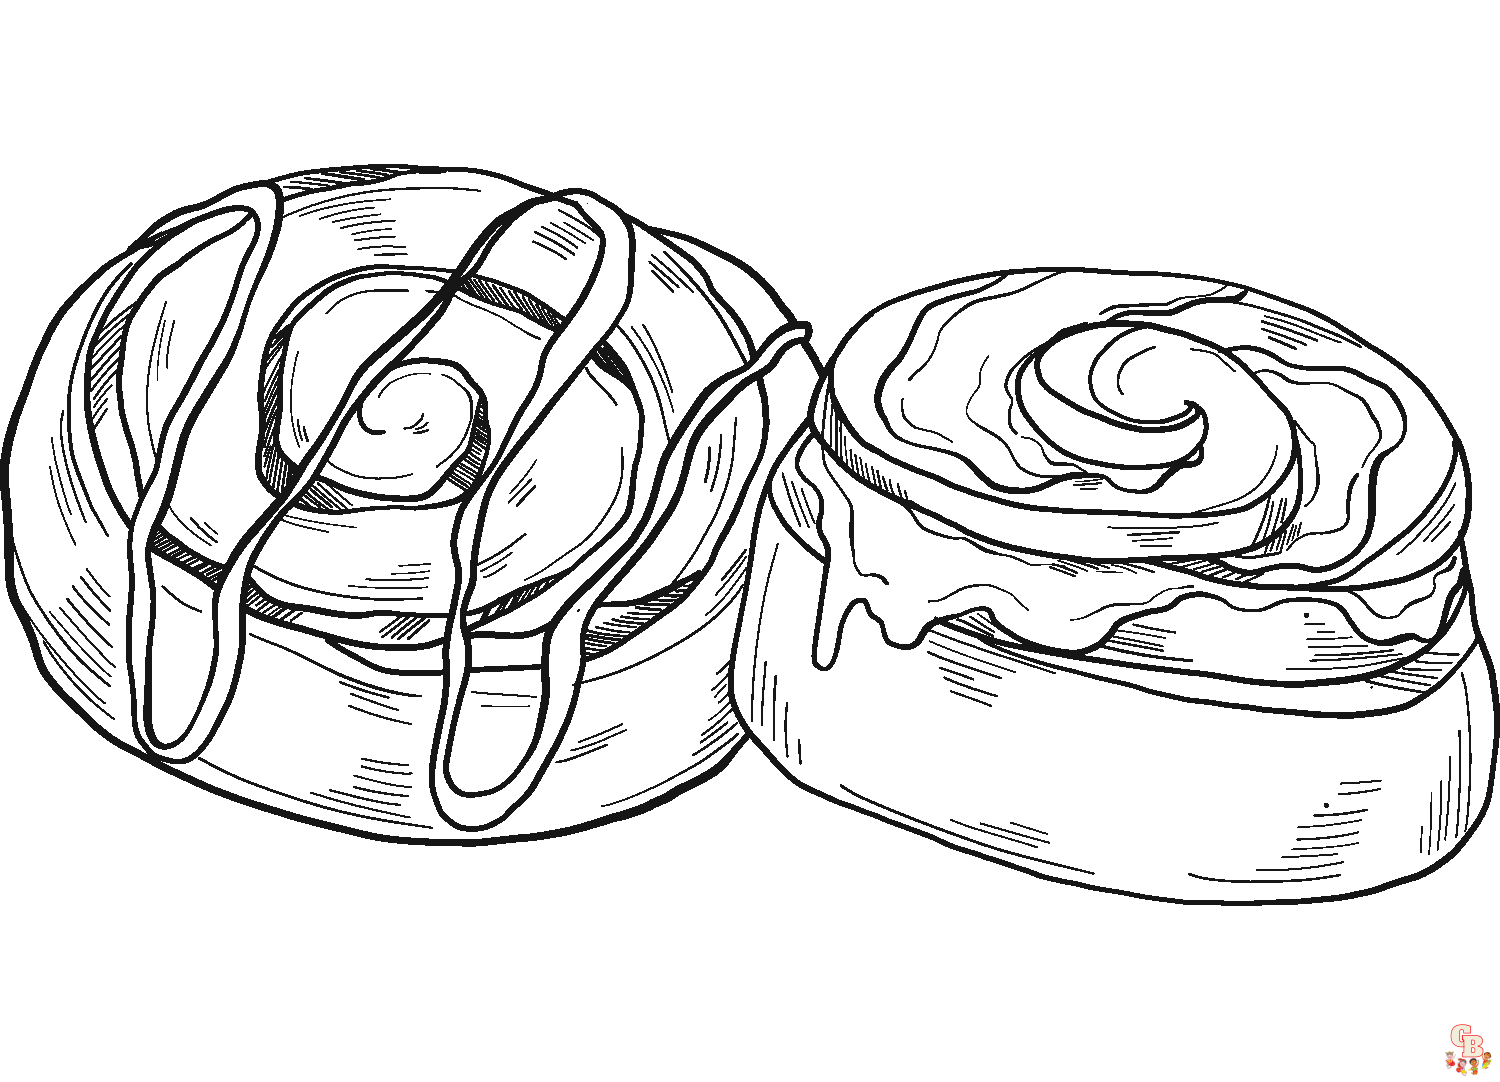 Free Cinnamon roll coloring pages for kids